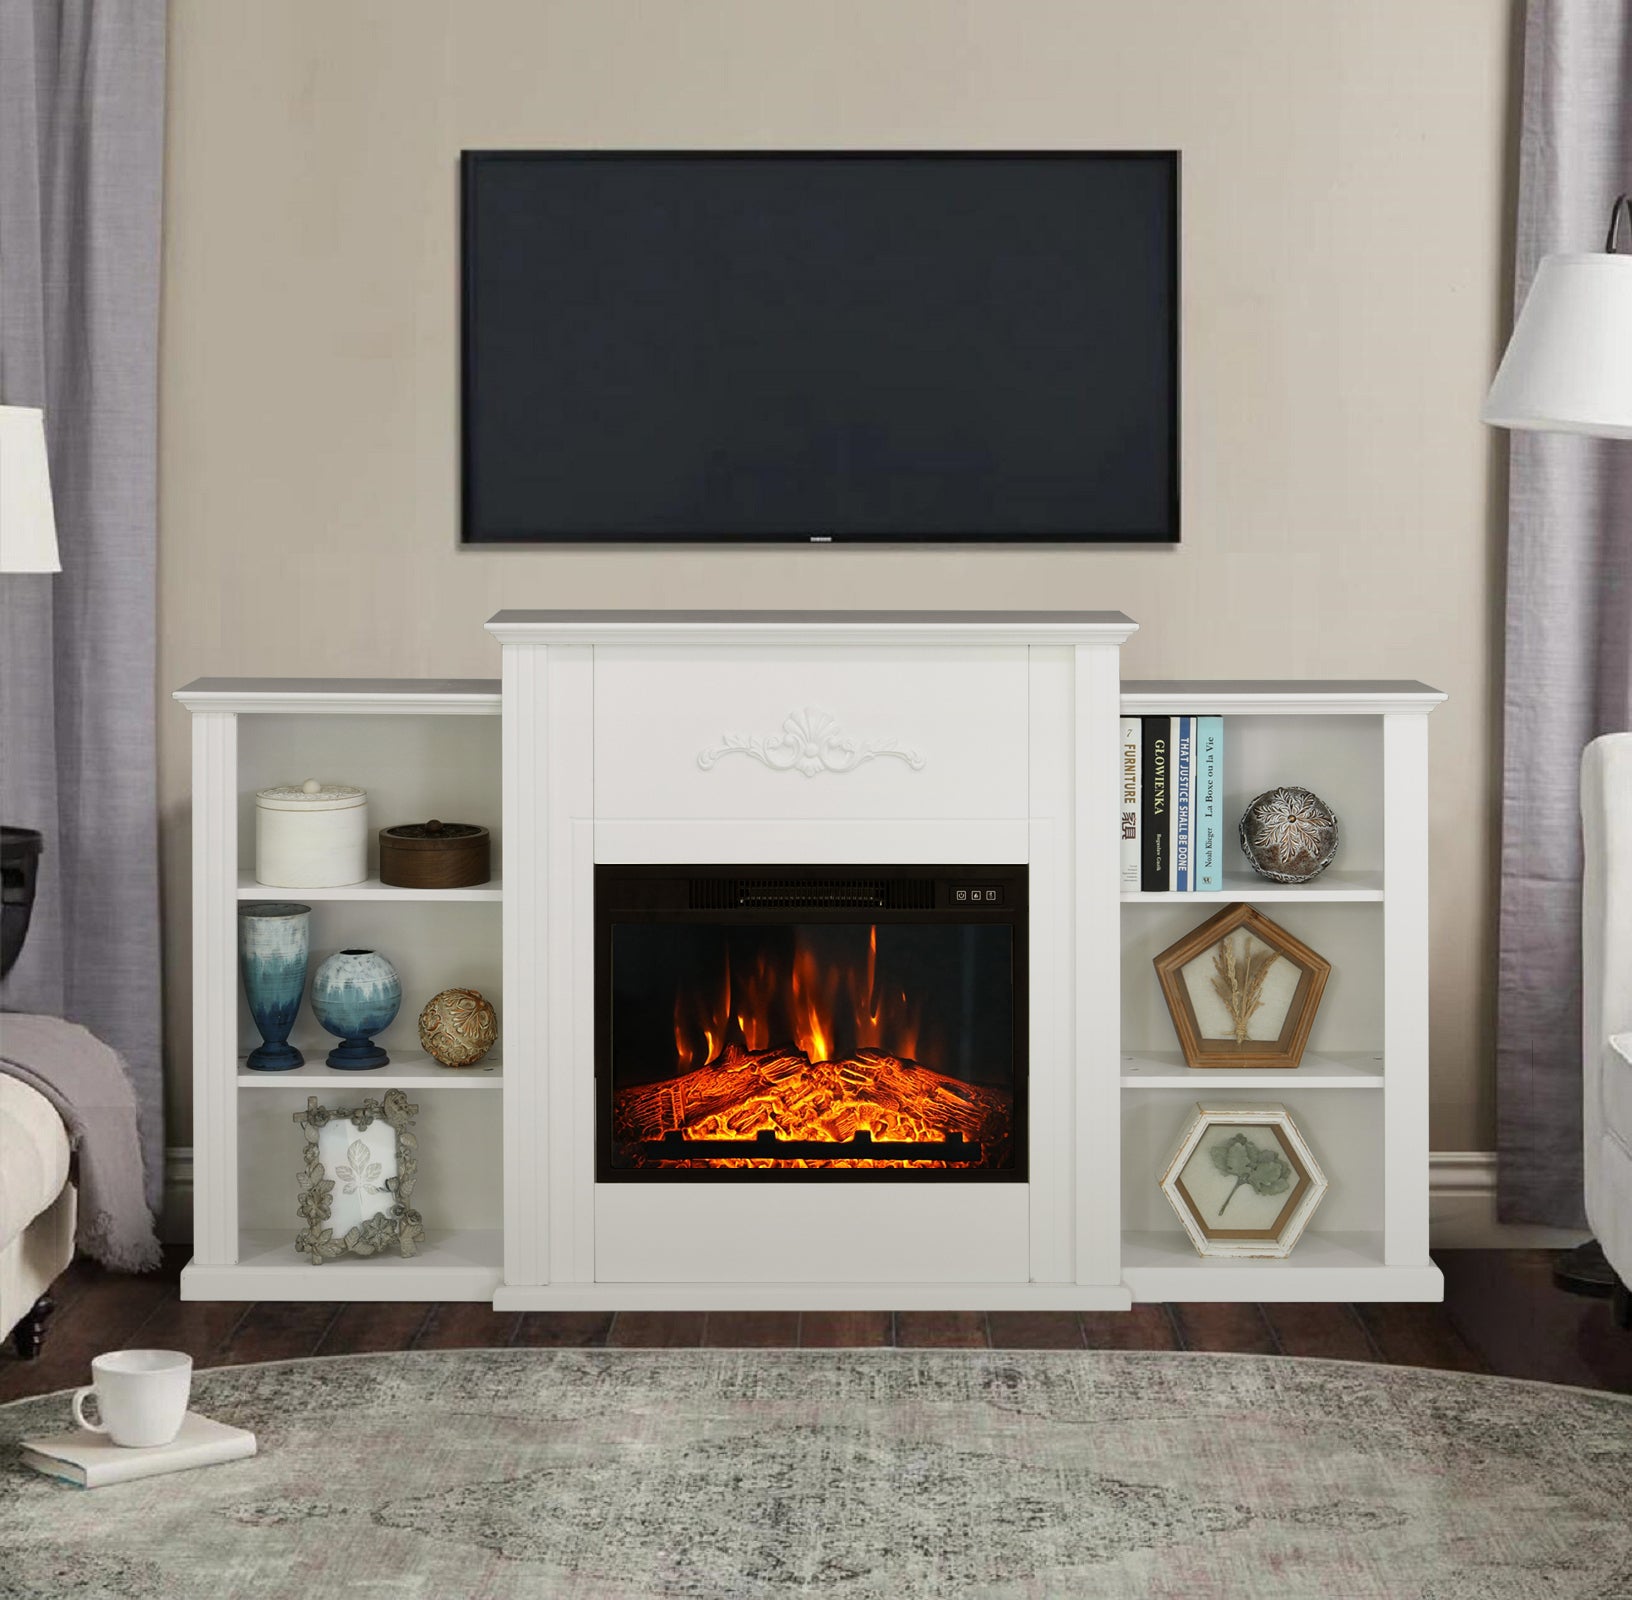 MFSTUDIO MDF+Resin Decor 70″Mantel TV Cabinet with 23'' Plug-in Electric Fireplace